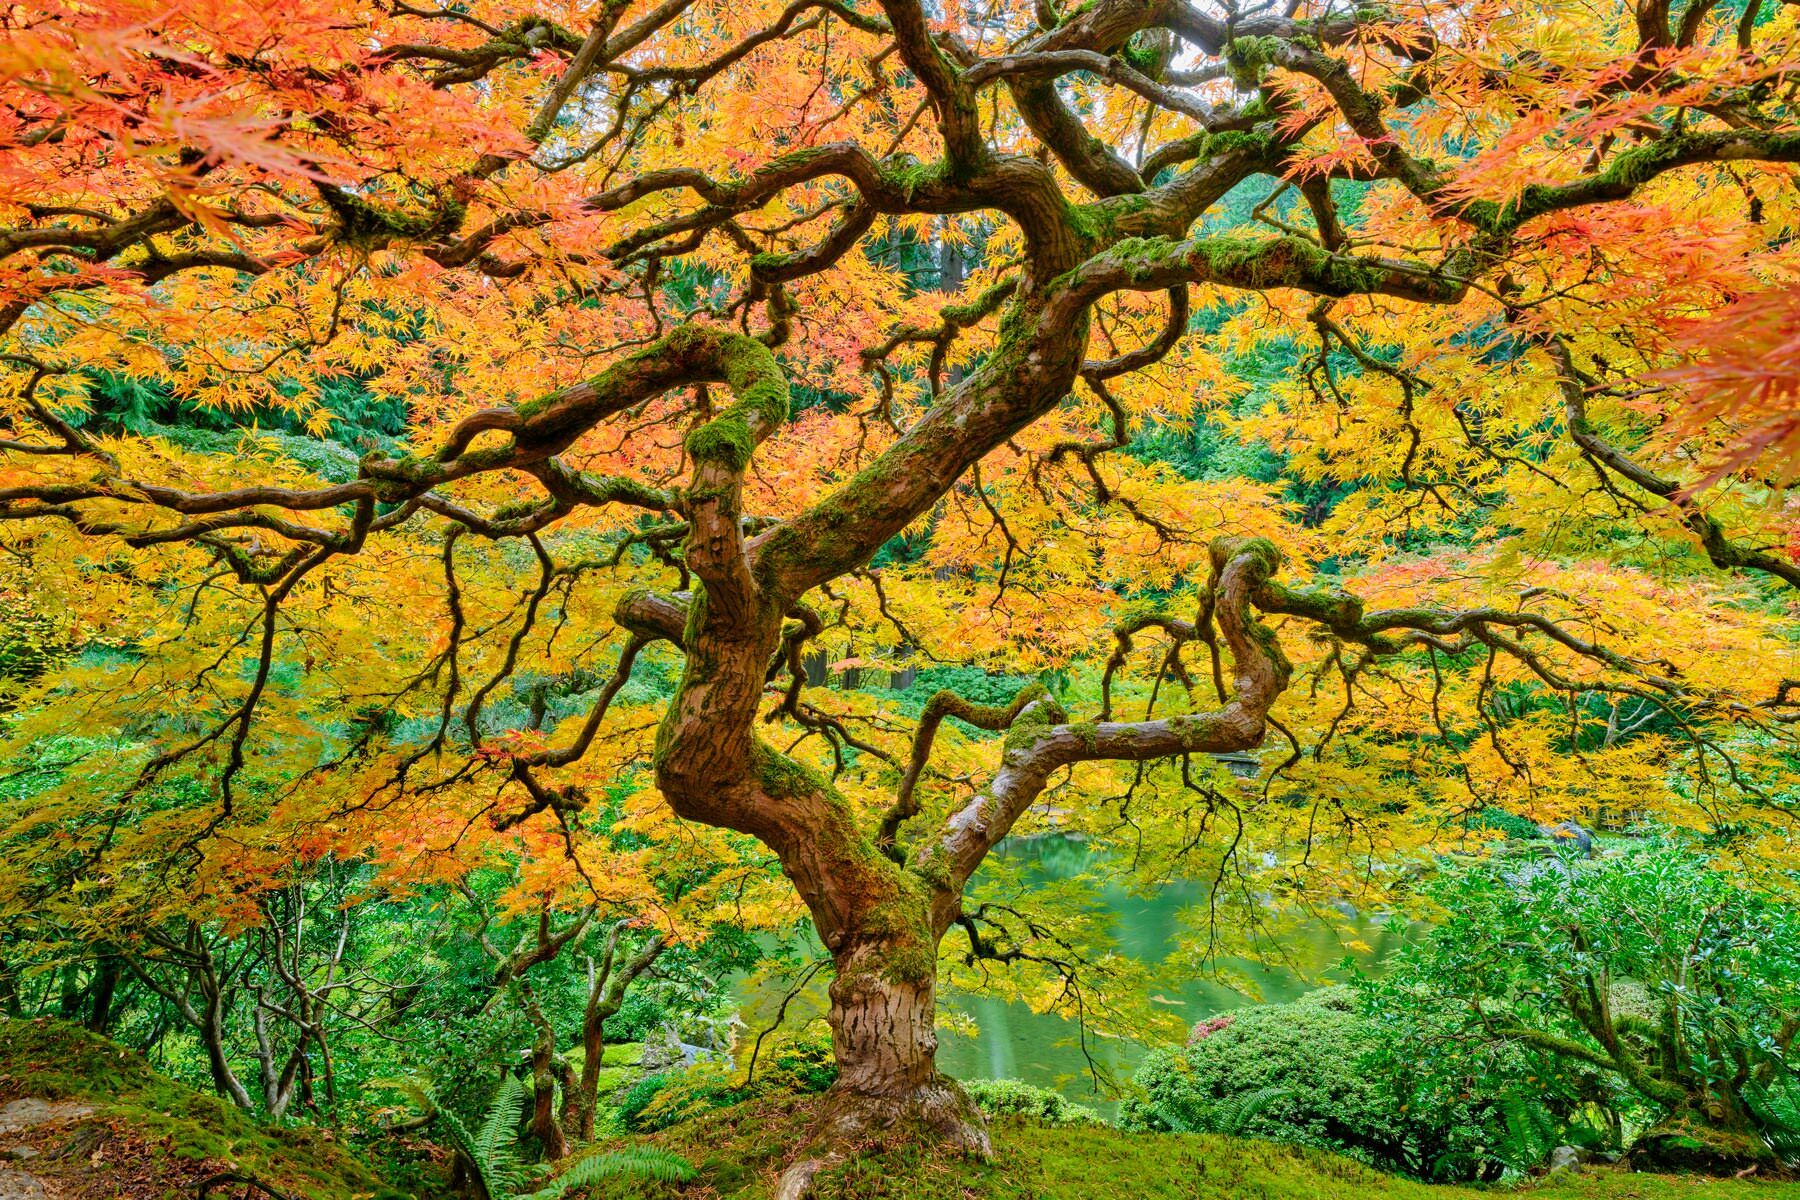 a beautiful japanese lace maple with incredible fall colors twists gracefully through this photograph by artist Andrew Shoemaker